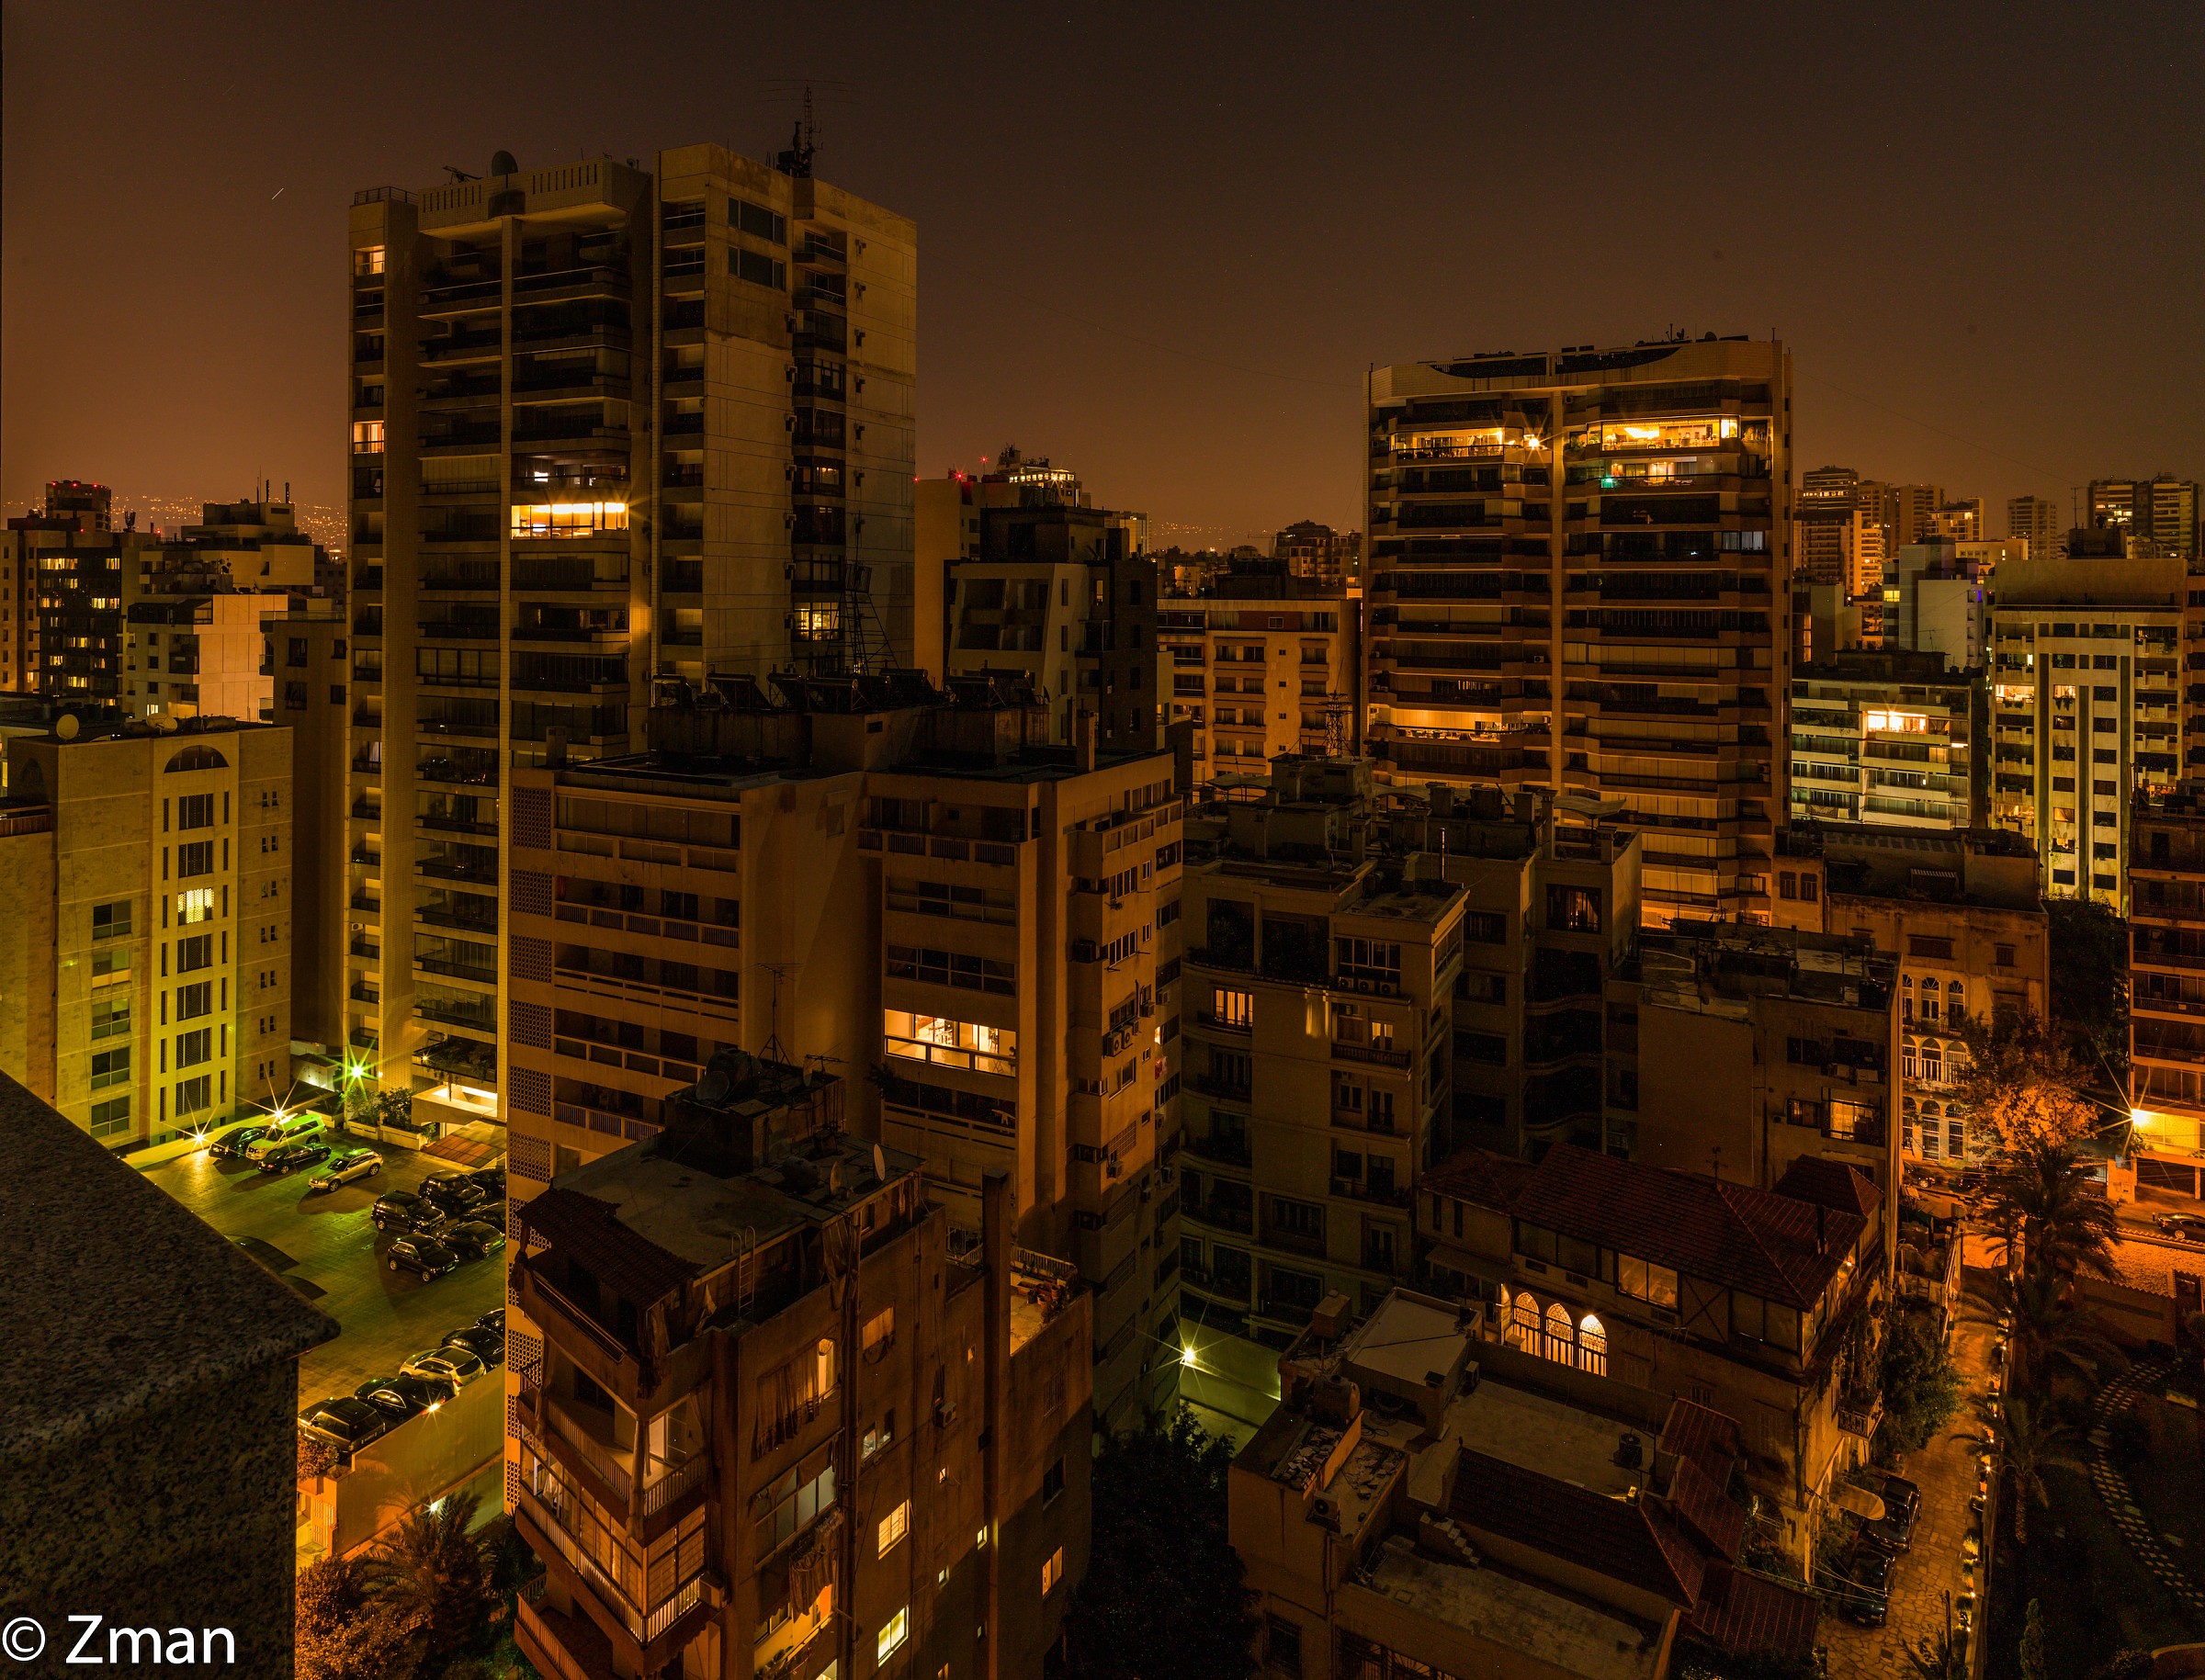 Beirut at Night From My window...